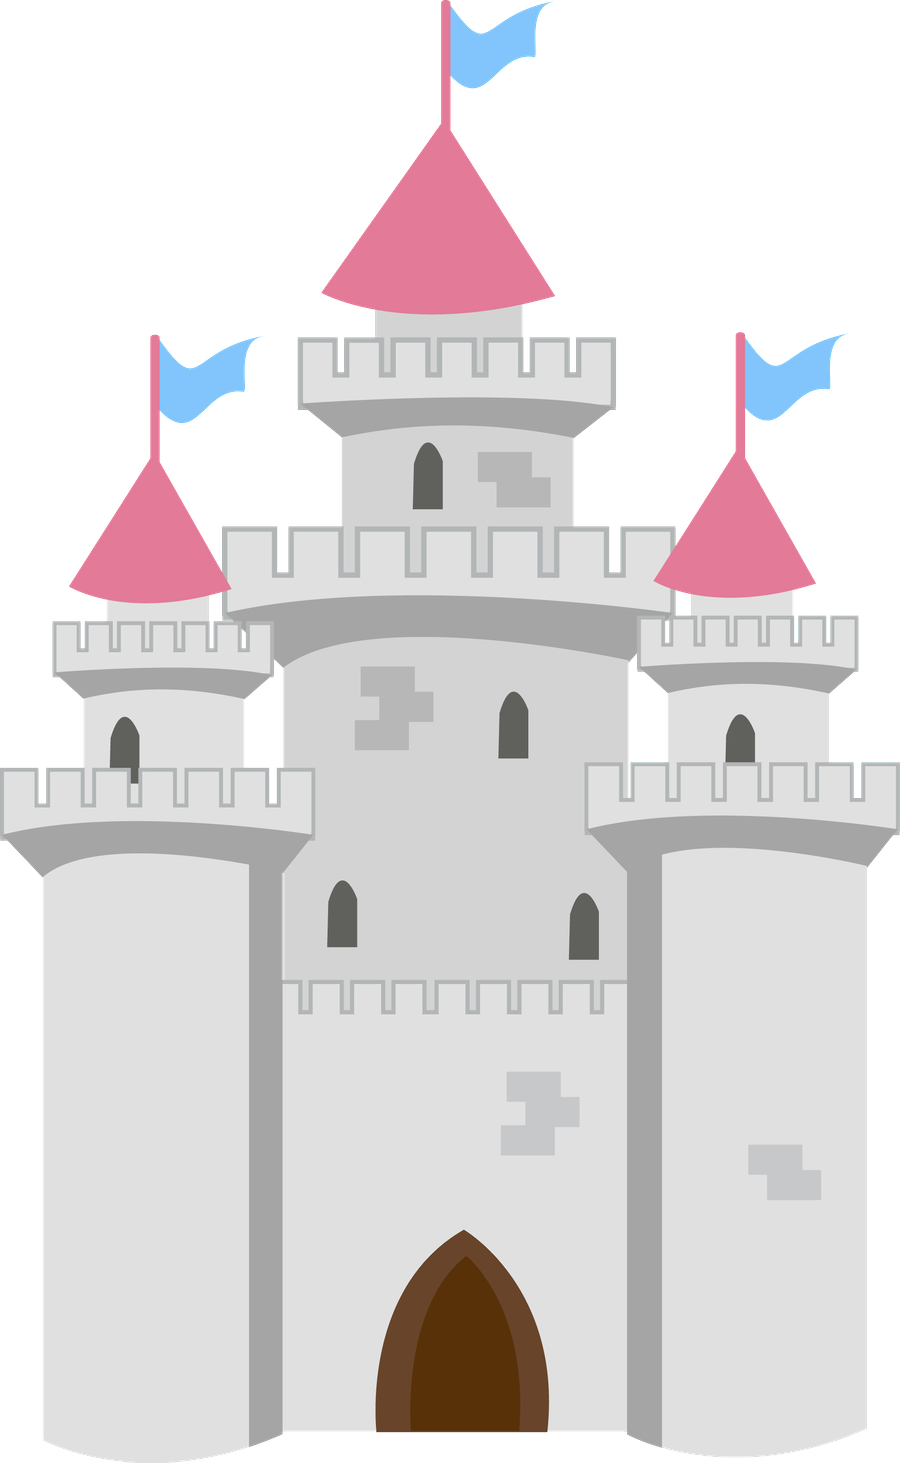 The most awesome images. Palace clipart castillo